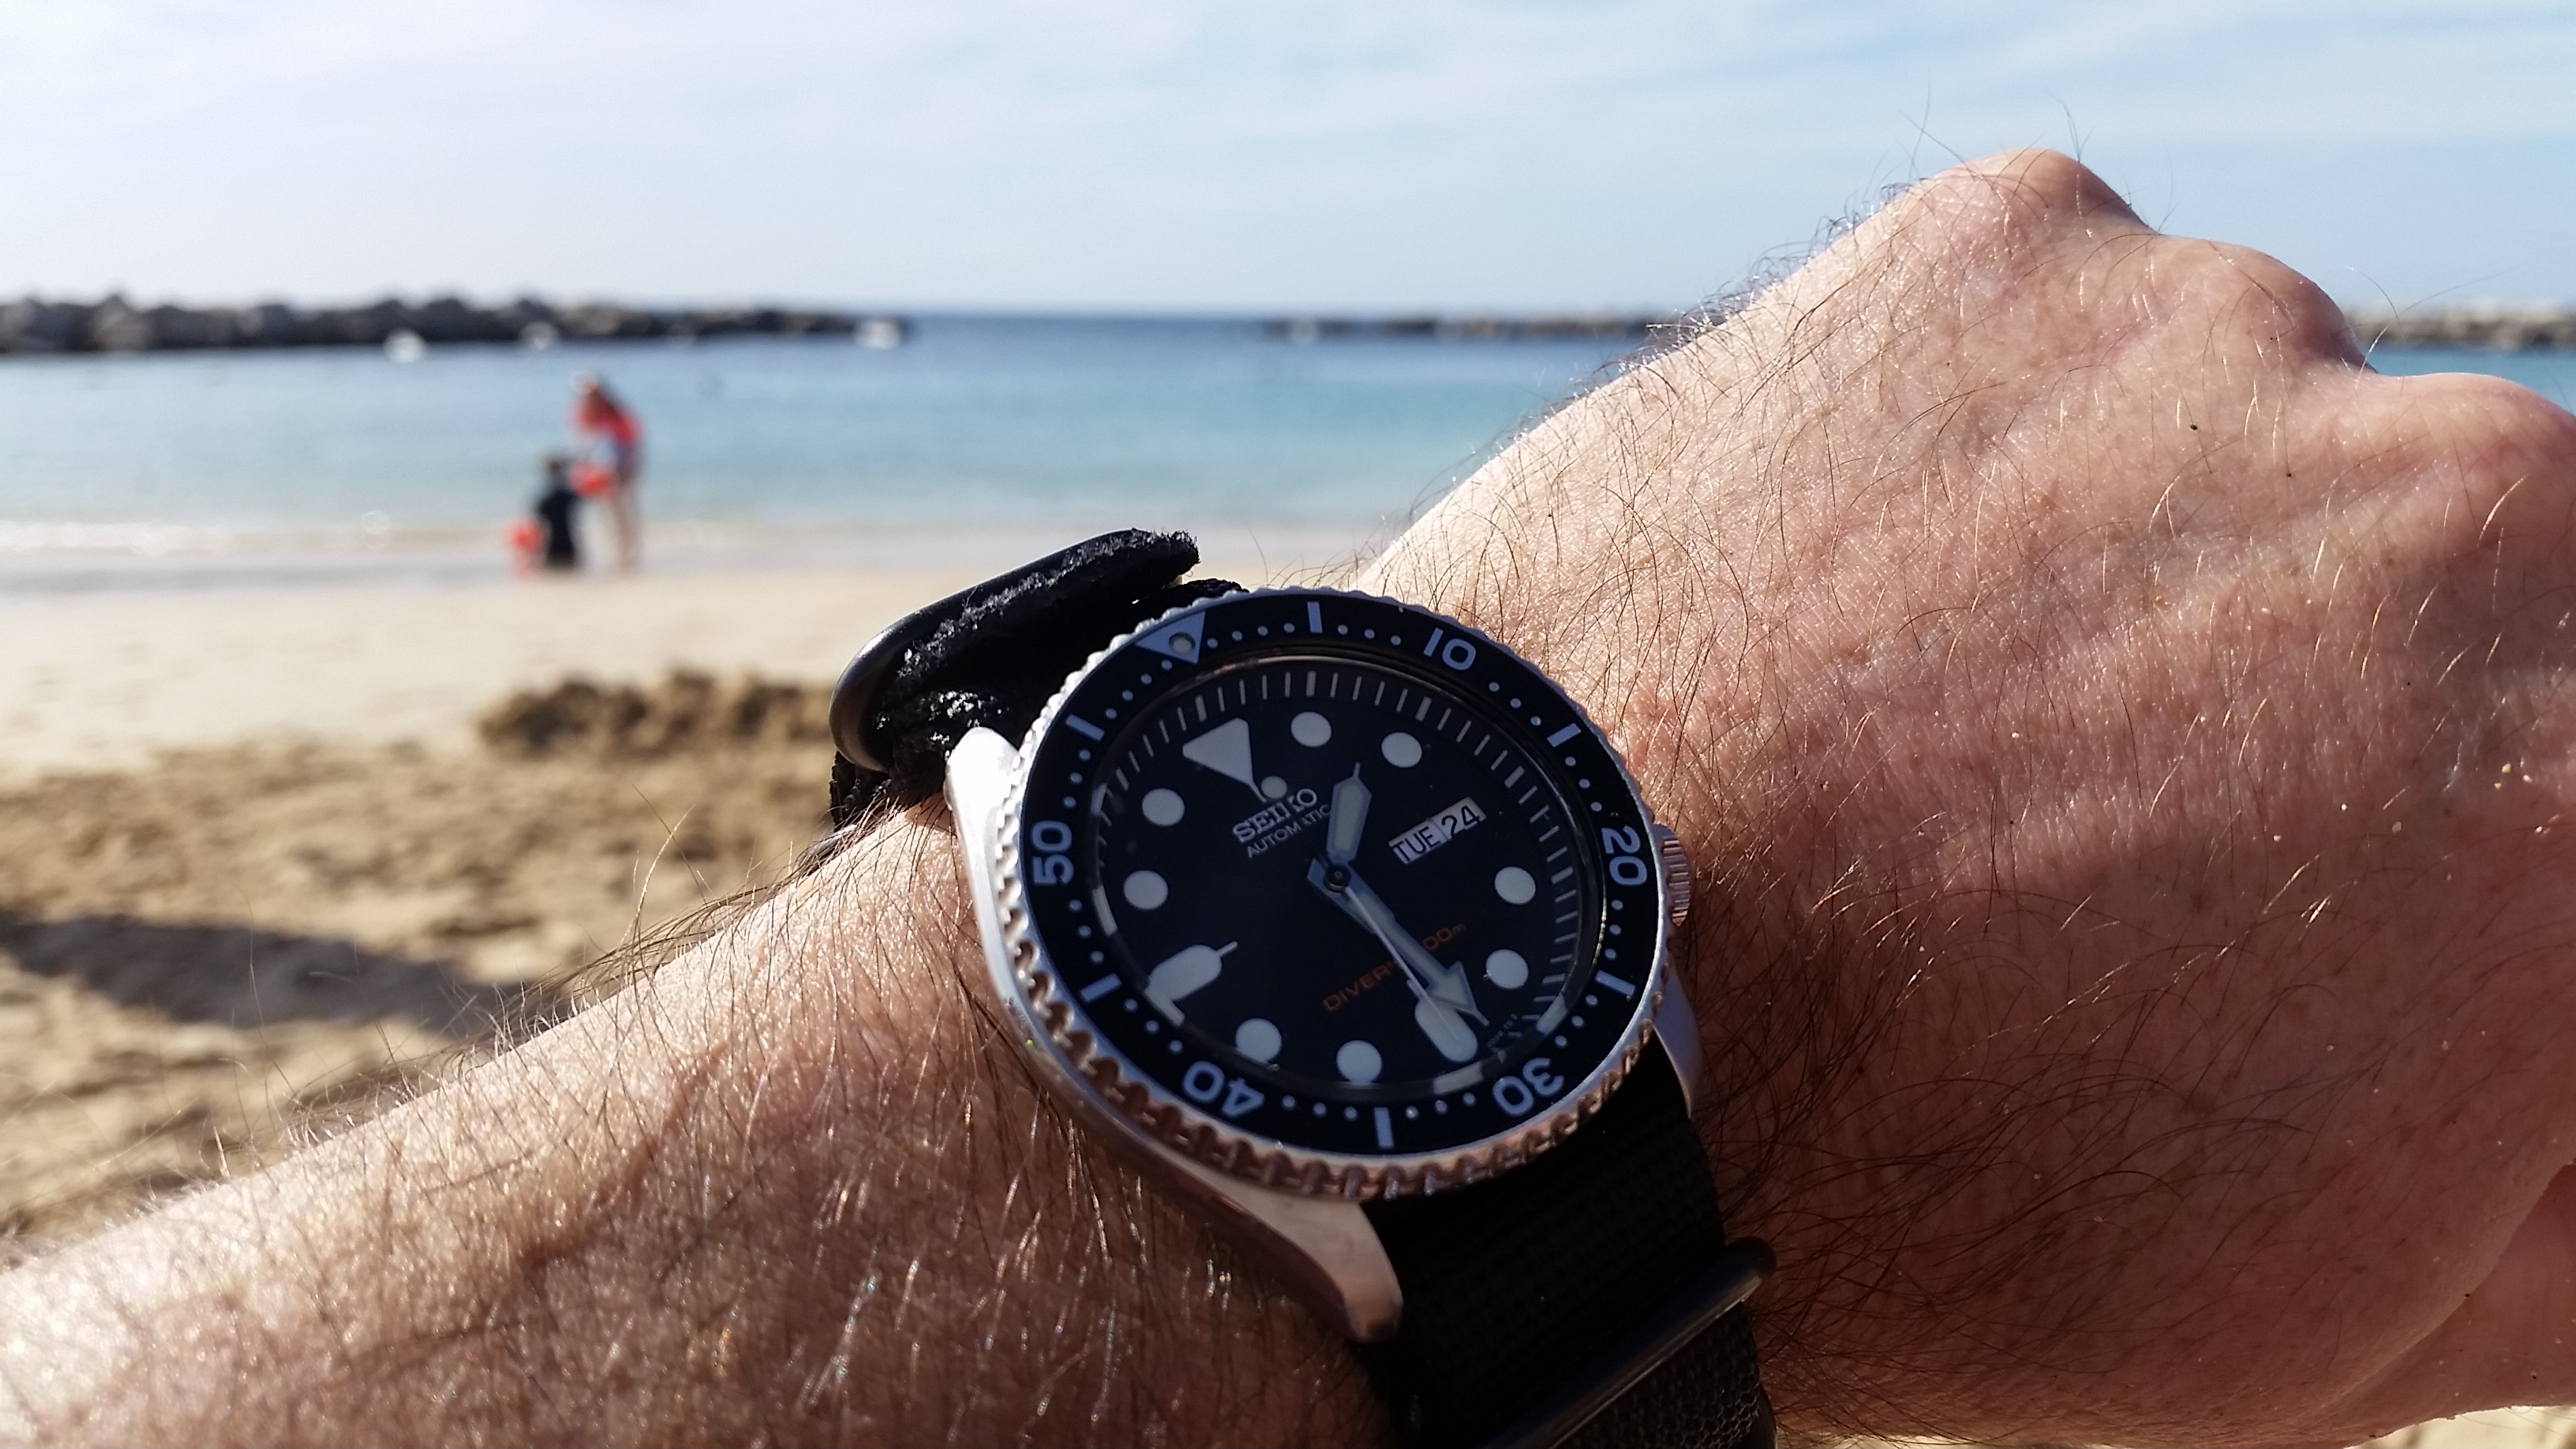 Let's see your Seikos! - Page 133 - Watches - PistonHeads